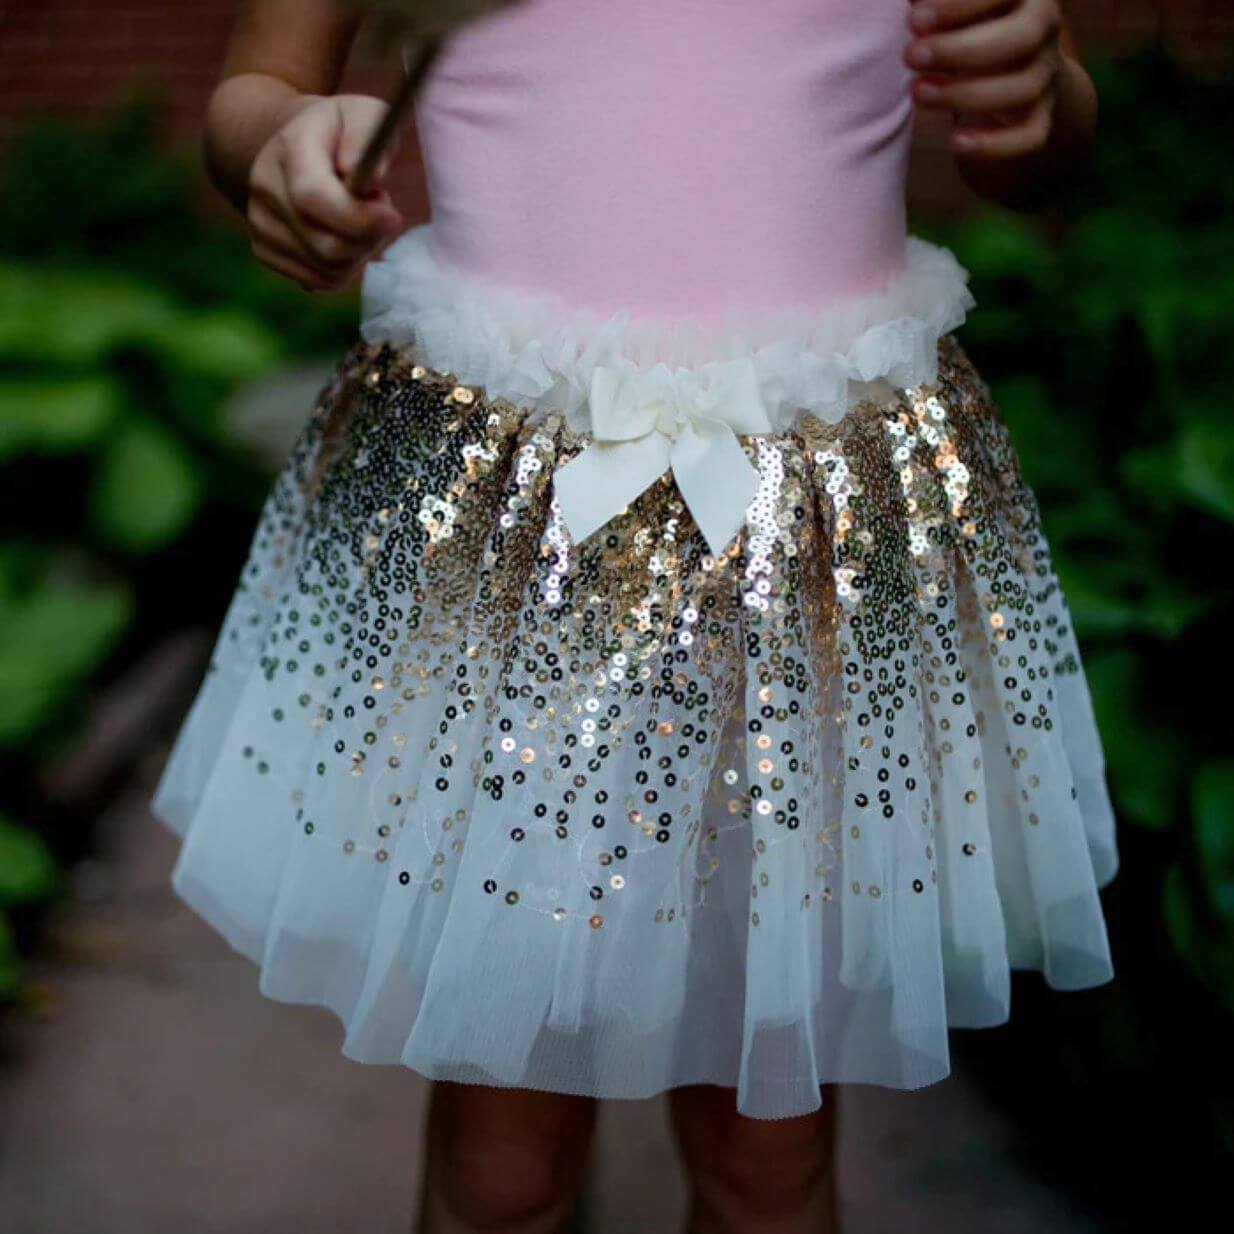 close up view of young girl wearing a white tutu skirt with gold sequins